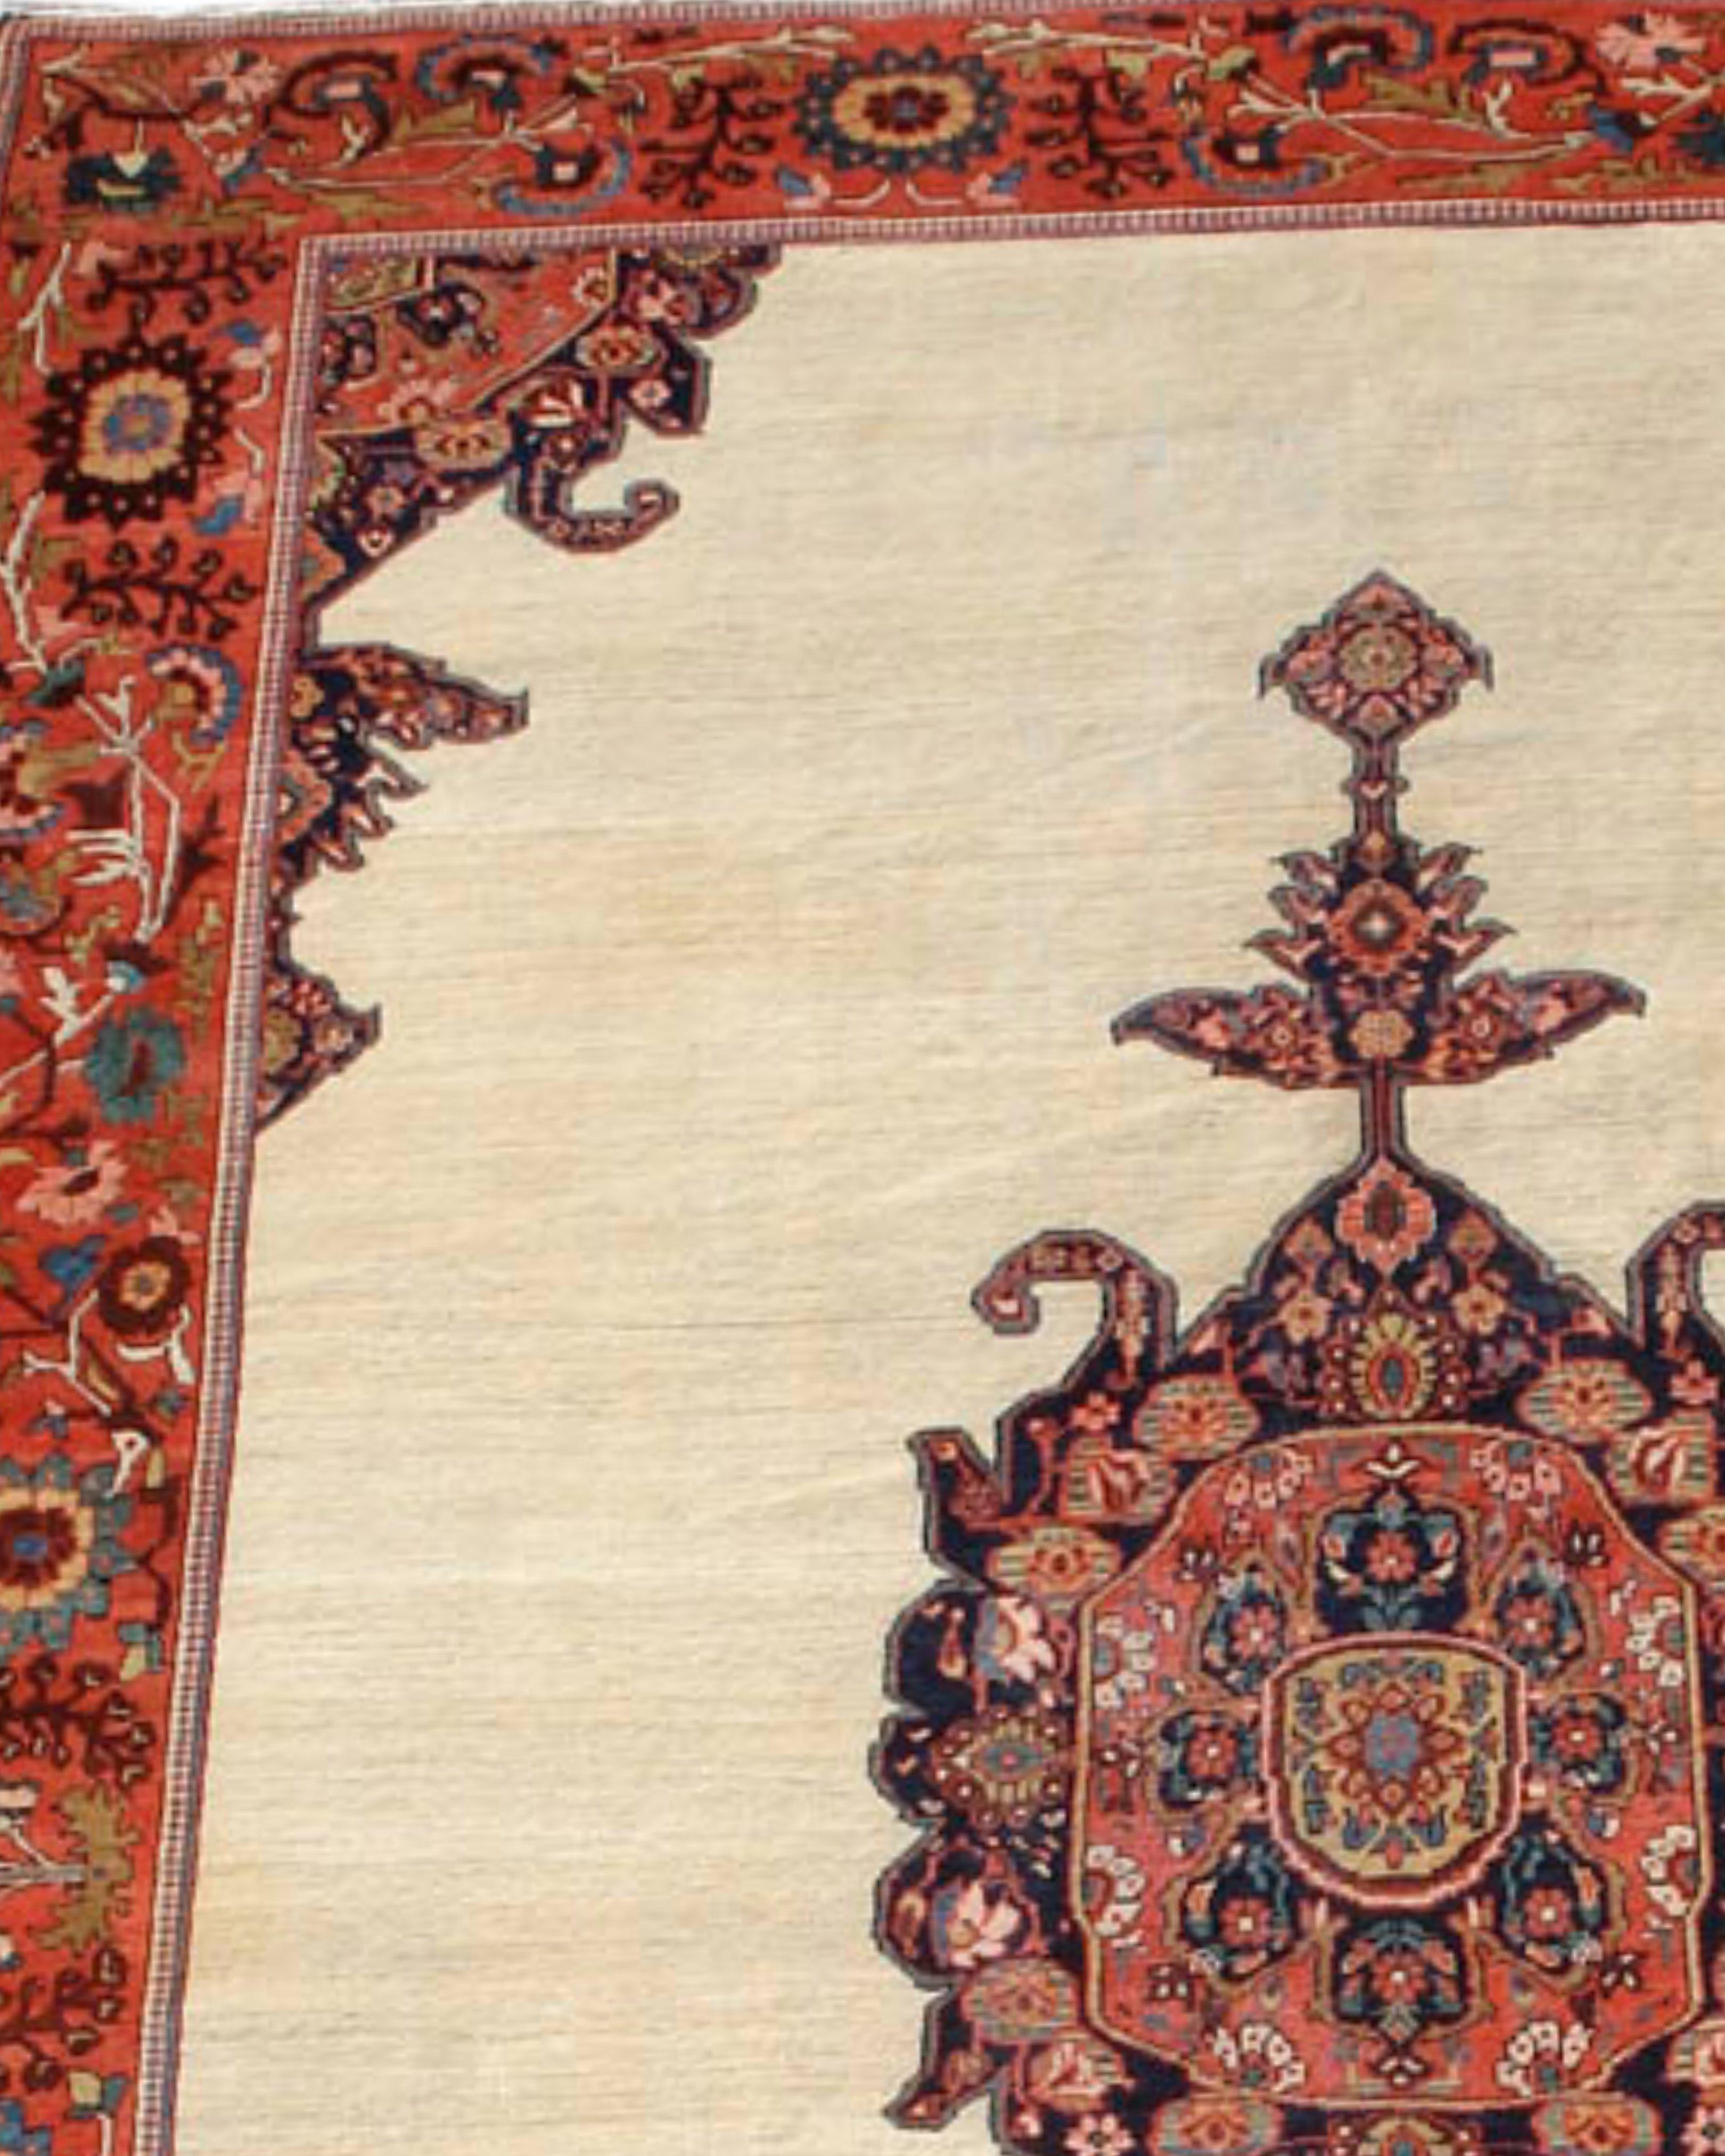 Hand-Woven Antique Persian Fereghan Sarouk Rug, 19th Century For Sale